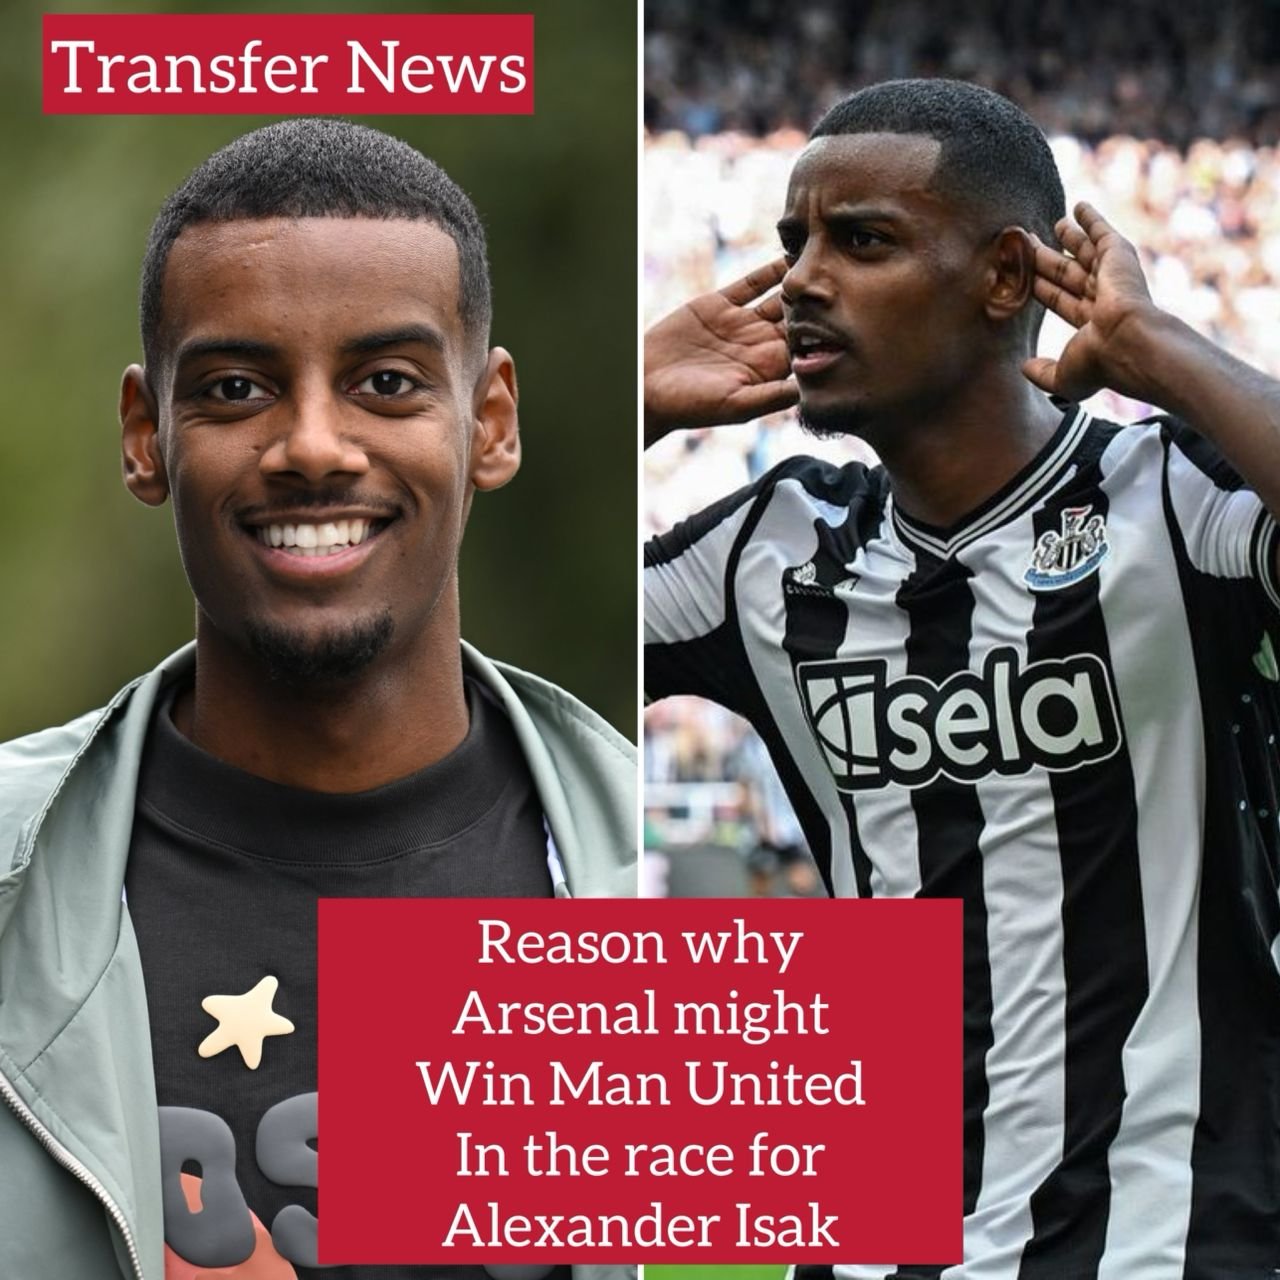 Main reason why Newcastle United might end up selling the 24-year-old forward Alexander Isak to Arsenal instead of Manchester United